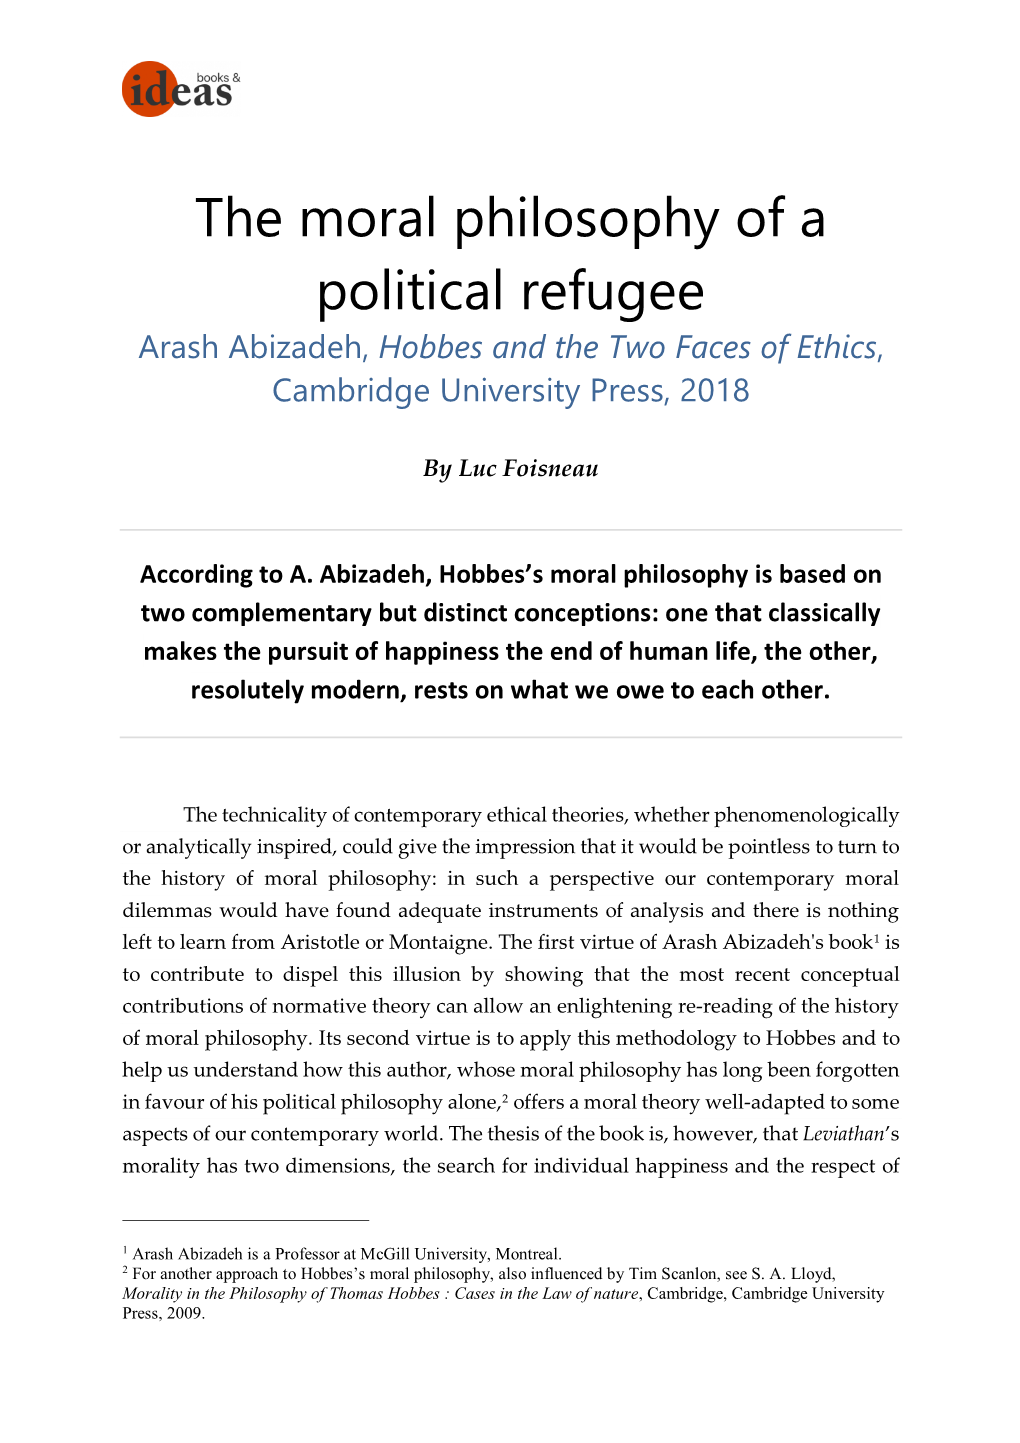 The Moral Philosophy of a Political Refugee Arash Abizadeh, Hobbes and the Two Faces of Ethics, Cambridge University Press, 2018